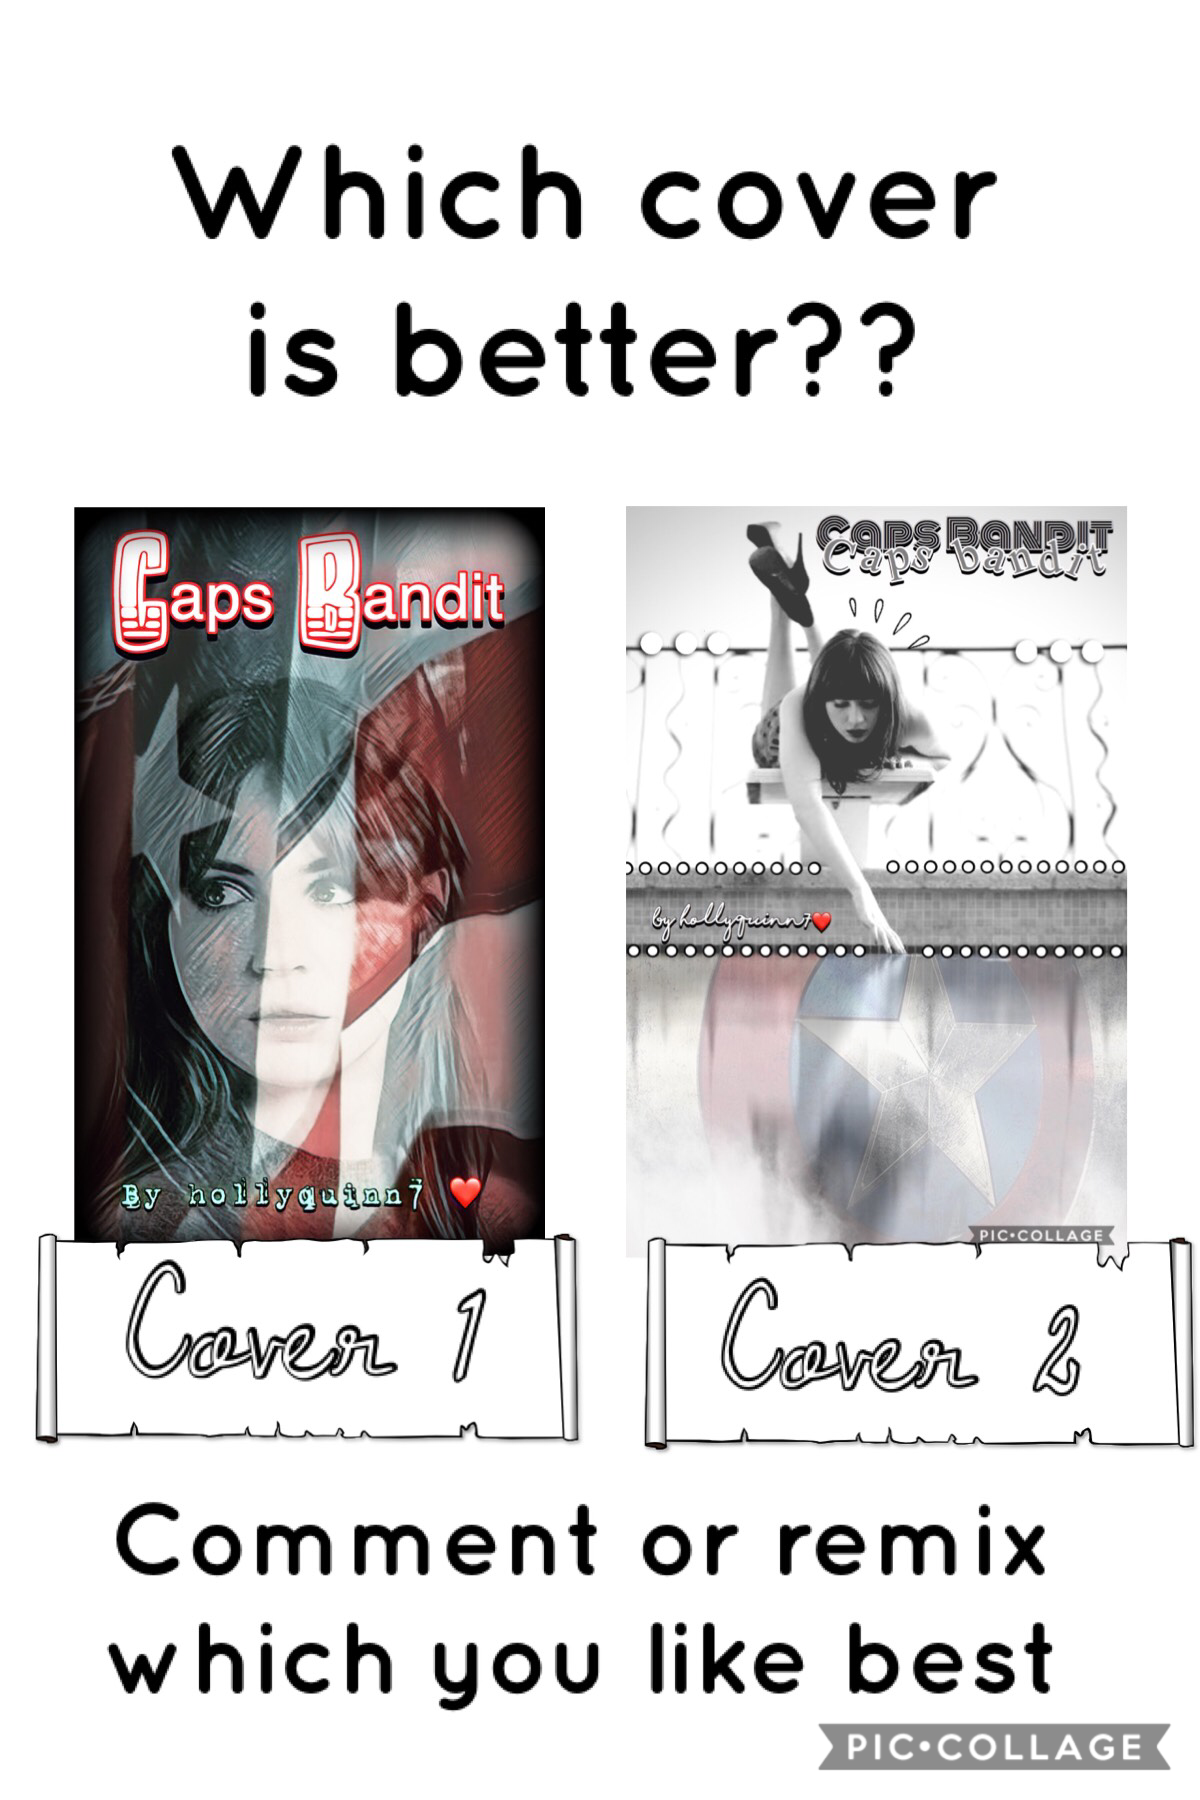 Tapp!!

Which cover is better 🤔🤔